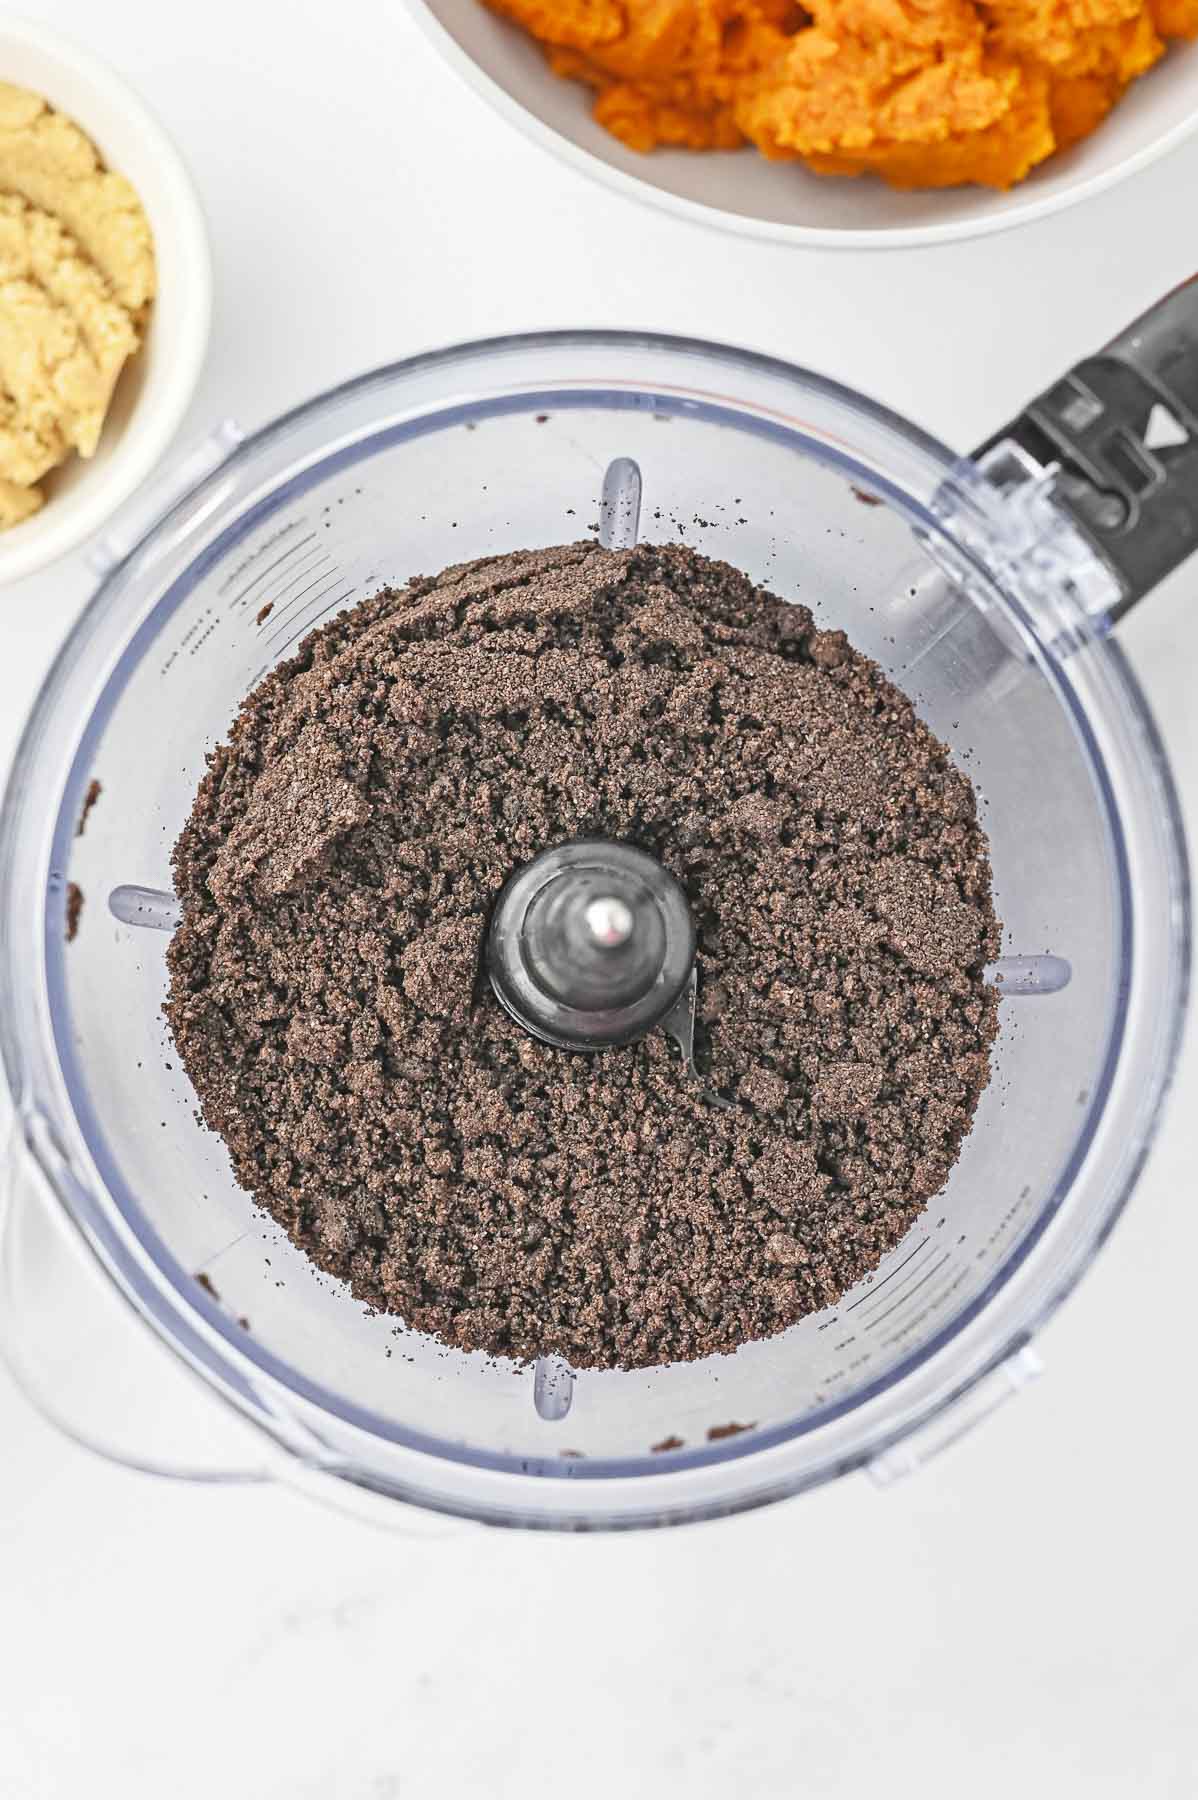 Oreo cookie crumbs in a food processor.